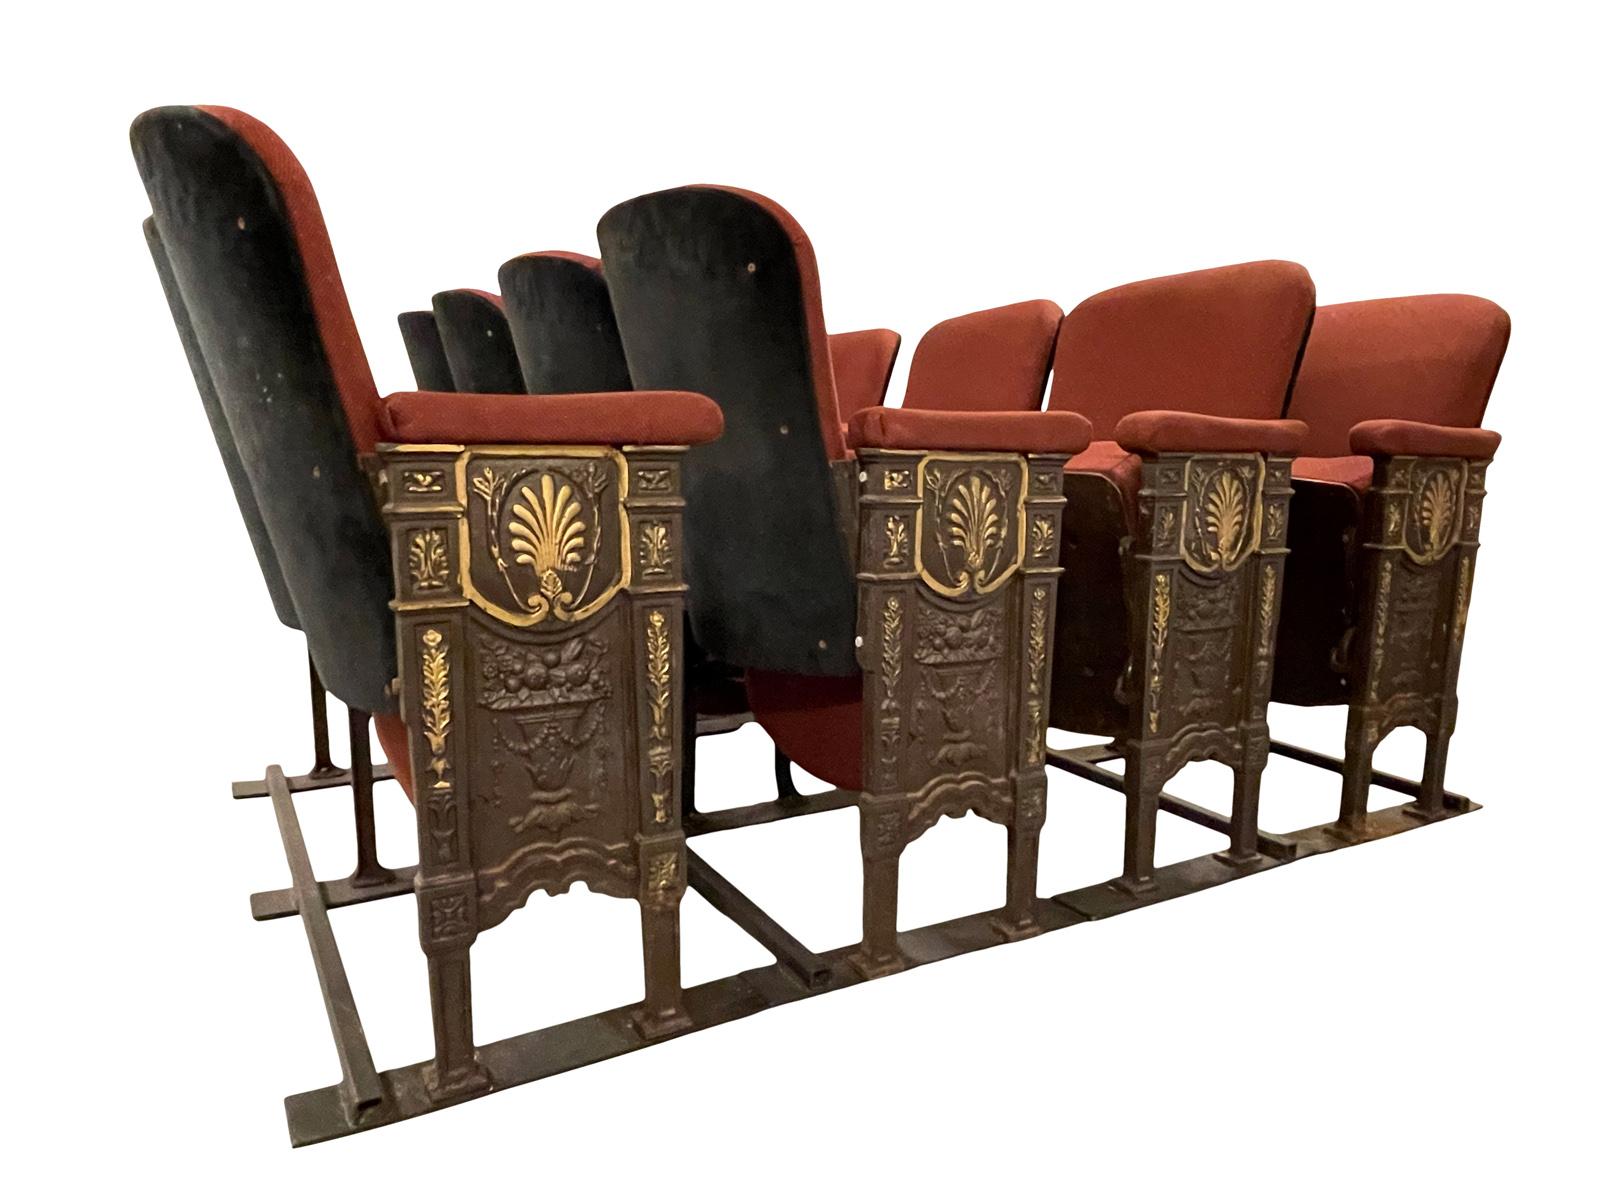 These are original 1920s art deco seating from Studio54 Newyork which have the original Cheetah upholstery underneath the existing. There is providence letter, stating where they came from any questions please feel free to reach out